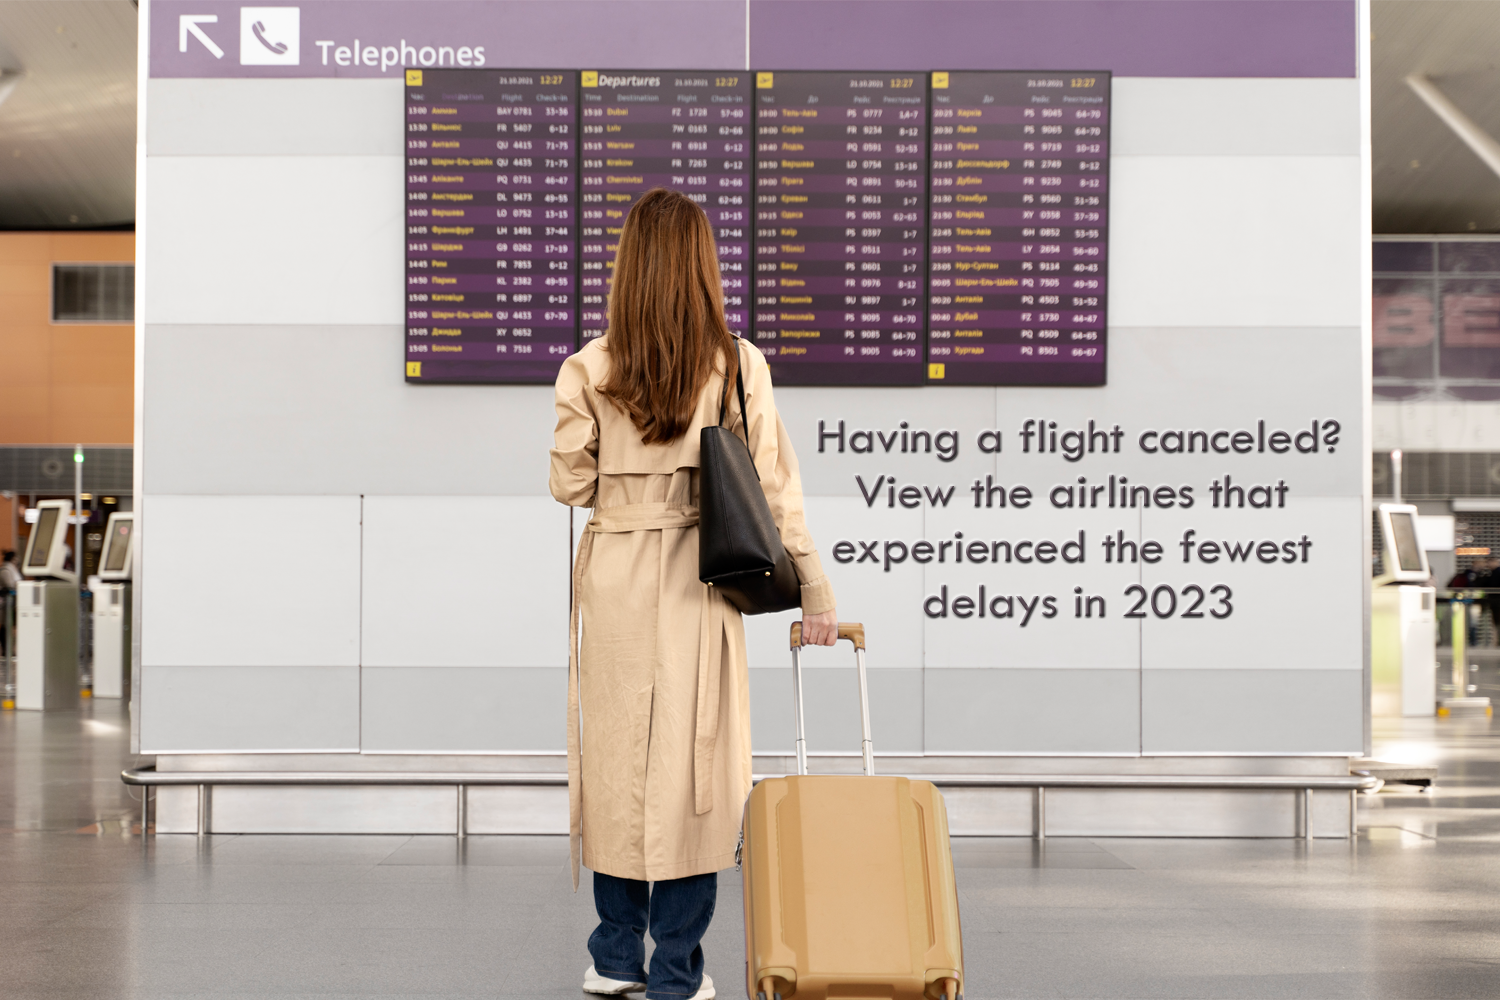 Having a flight canceled? View the airlines that experienced the fewest delays in 2023.